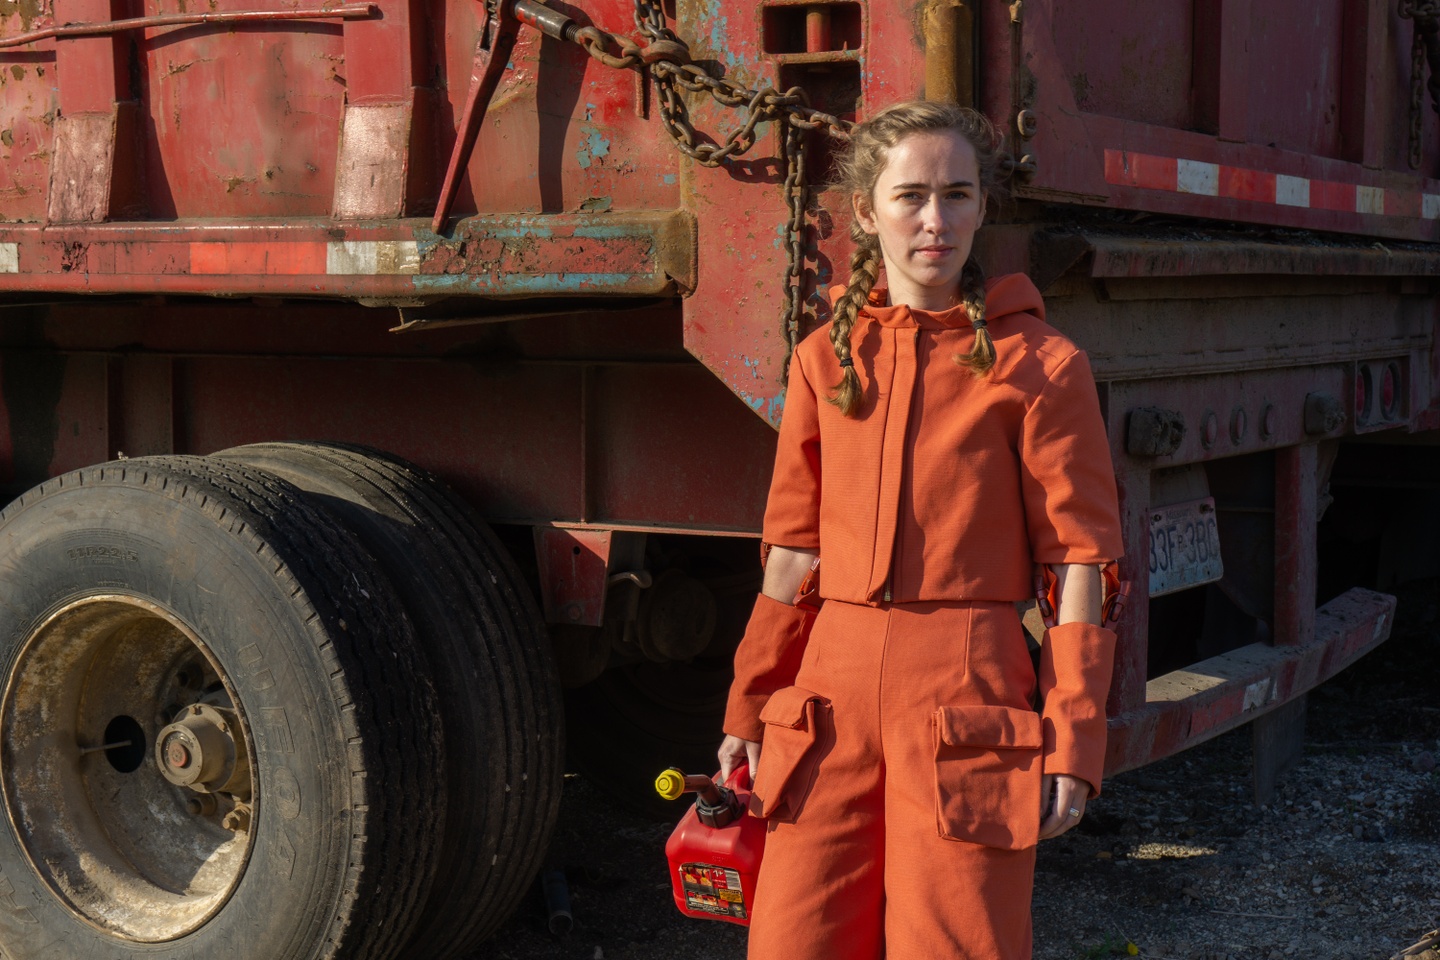 Model wears an a construction orange outfit consisting of pants with cargo pockets and a hooded cropped jacket with zipper and detachable sleeves below the elbow. Model stands in front of a dump truck clutching a gas can.